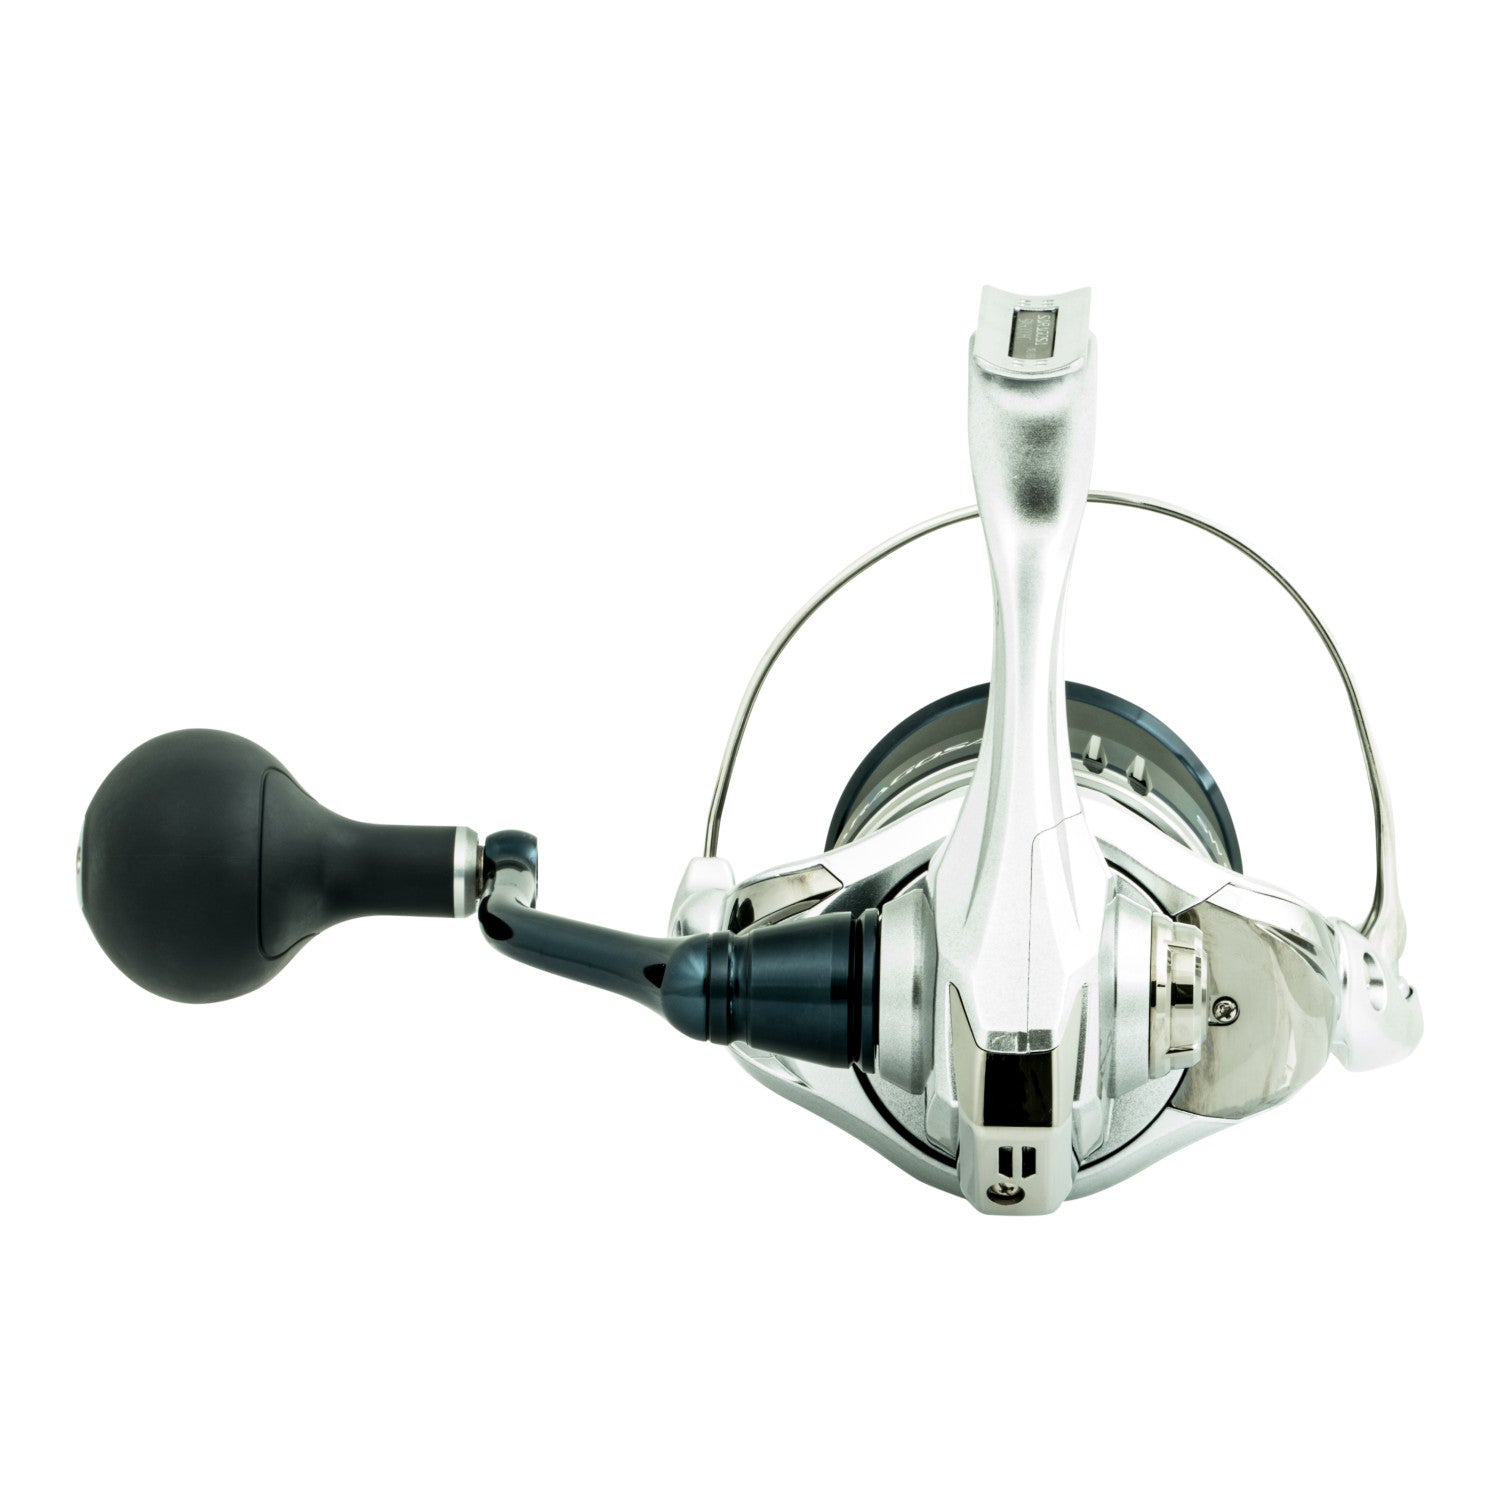 Shimano Saragosa SW A Offshore Saltwater Spinning Fishing Reel